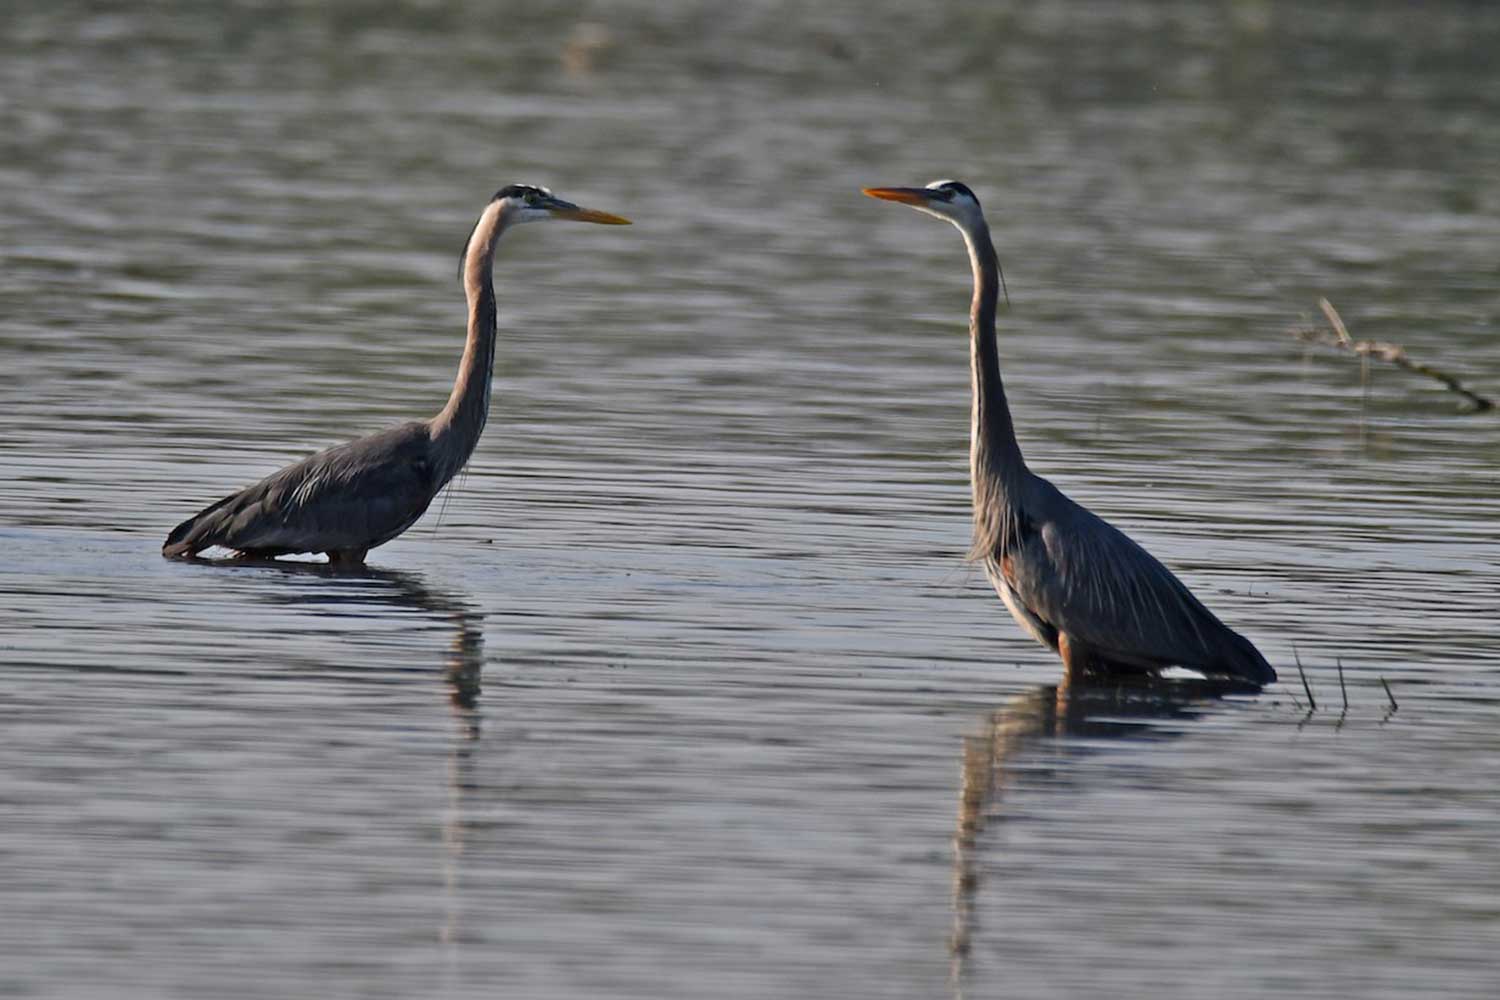 Two great blue herons standing and facing each other in shallow water.